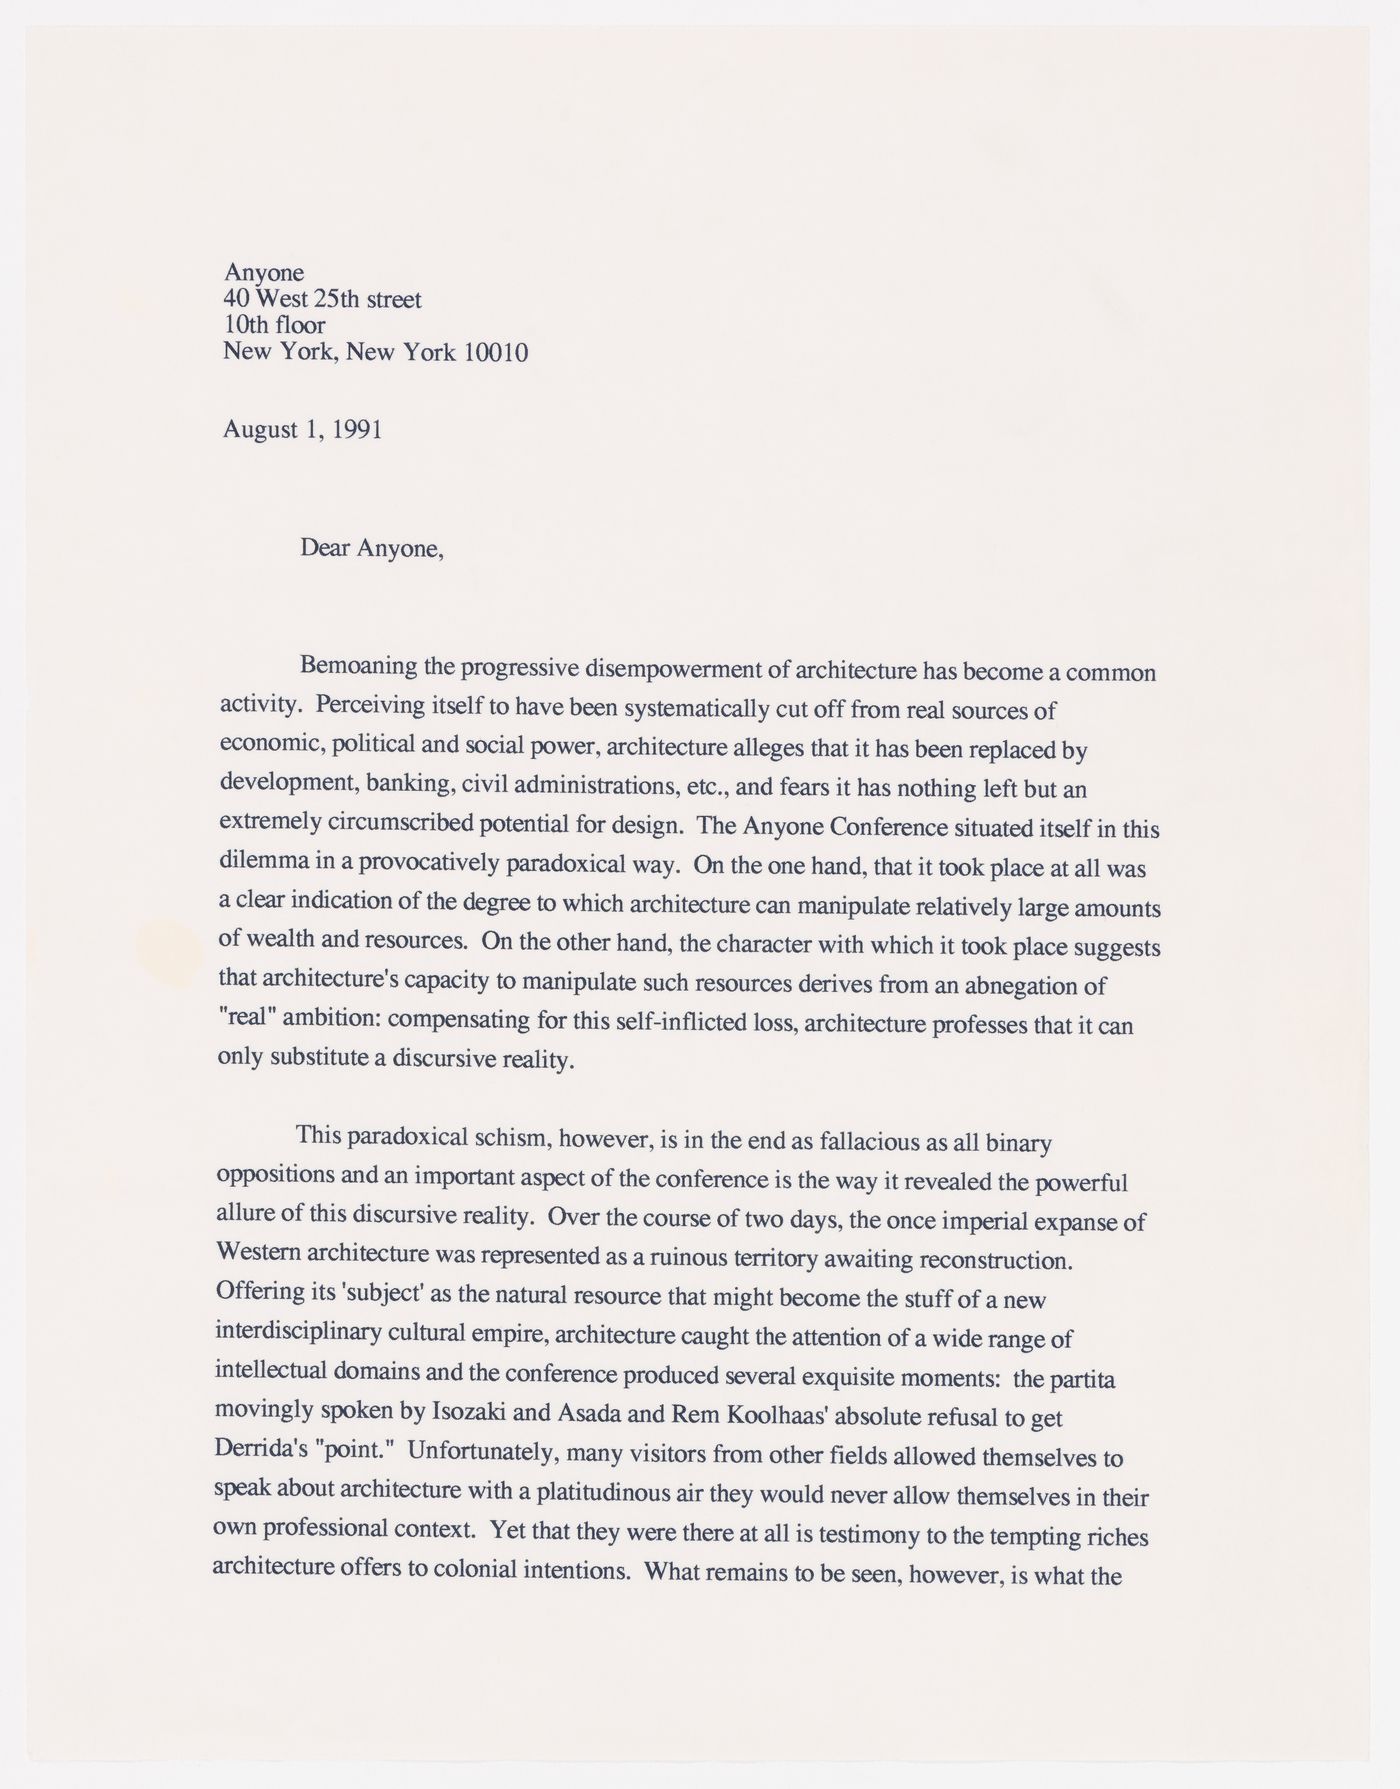 Letter from Sylvia Lavin to Davidson on the problems of interdisciplinary conversations in architecture